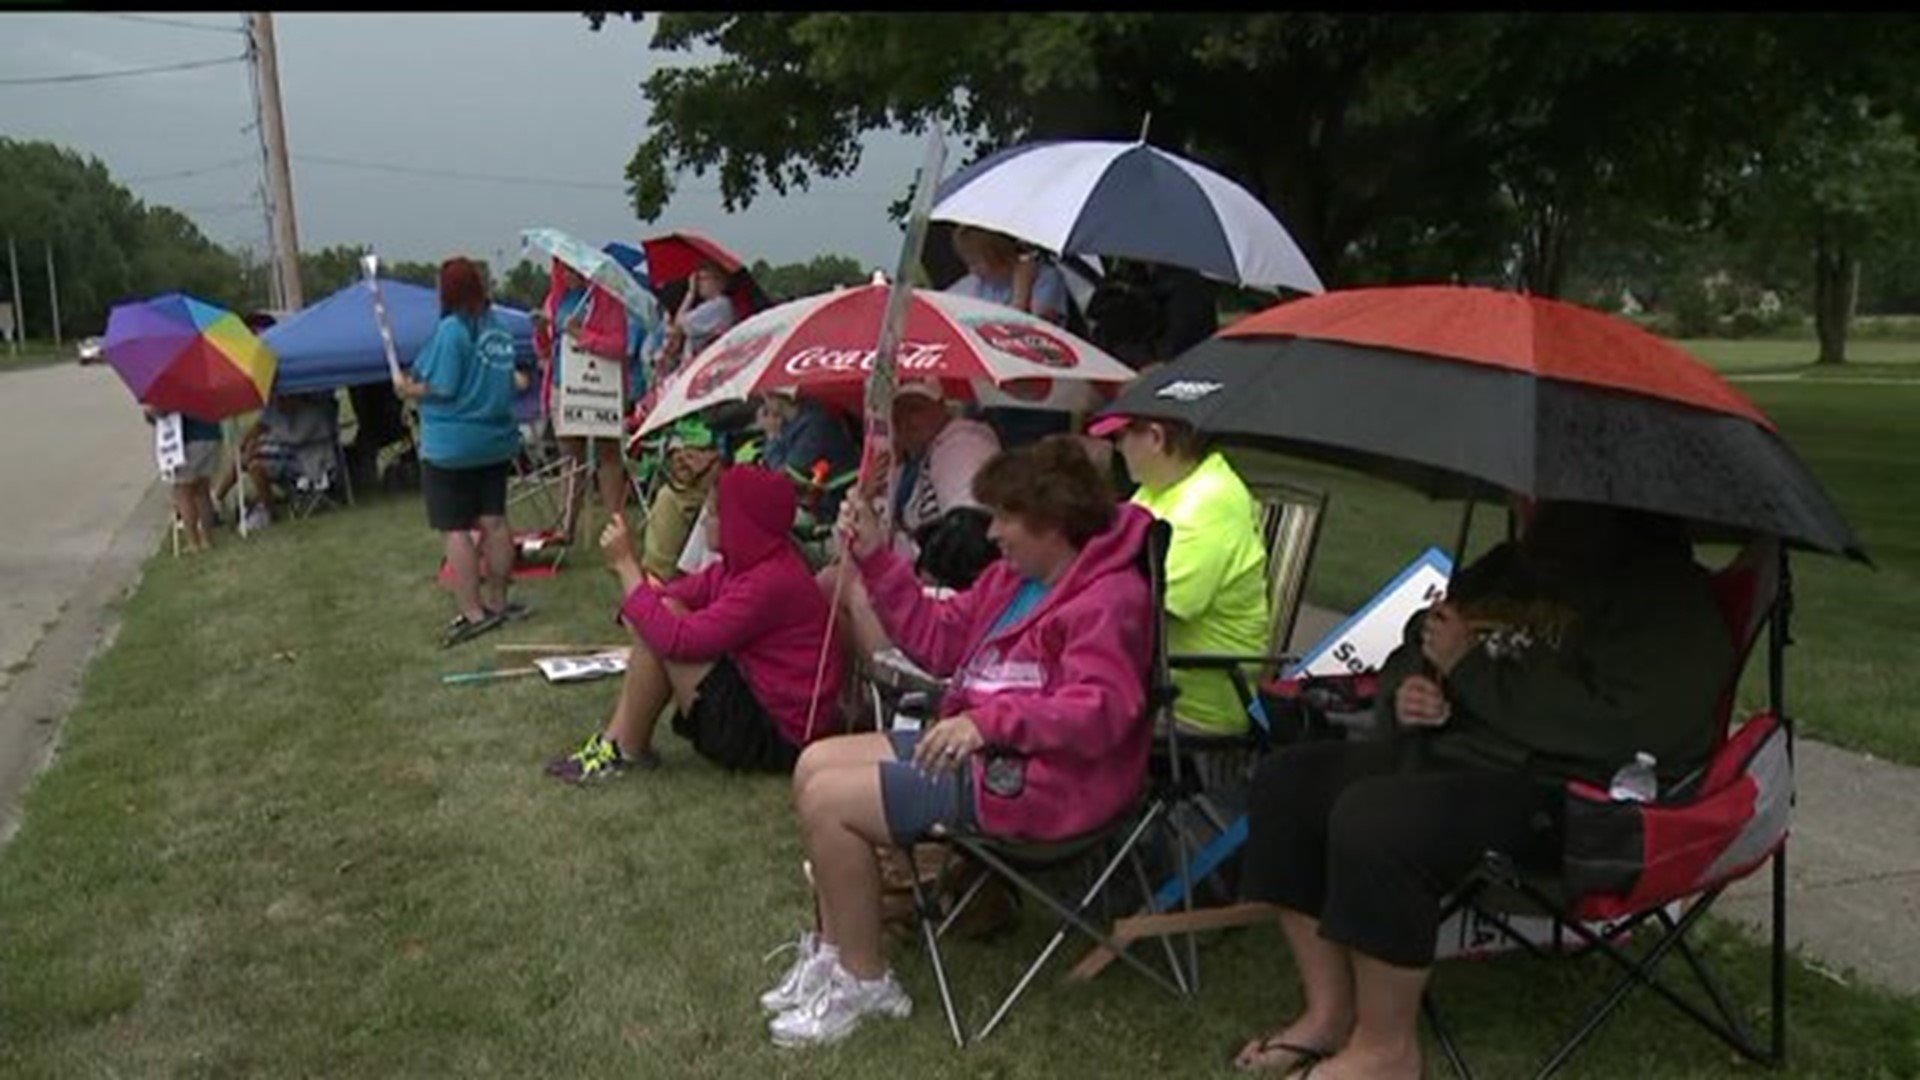 Galesburg community anxious for strike to end